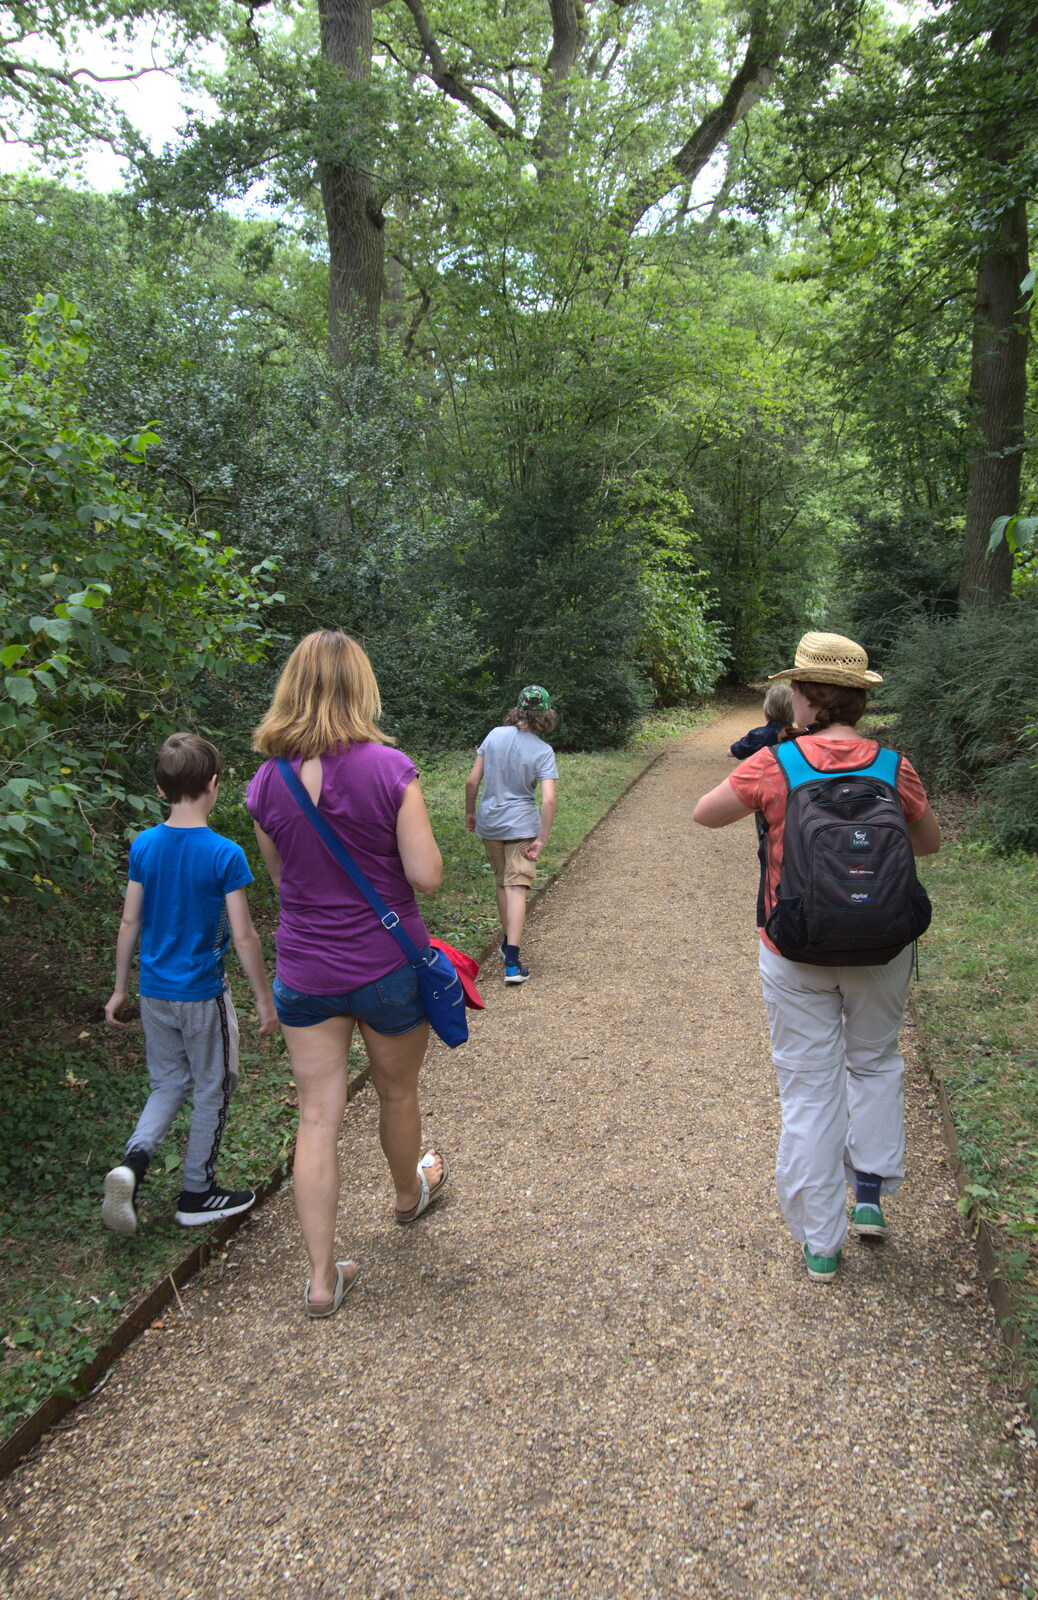 We head out on one of the walks through the woods from Back at Ickworth, and Oaksmere with the G-Unit, Horringer and Brome, Suffolk - 8th August 2020